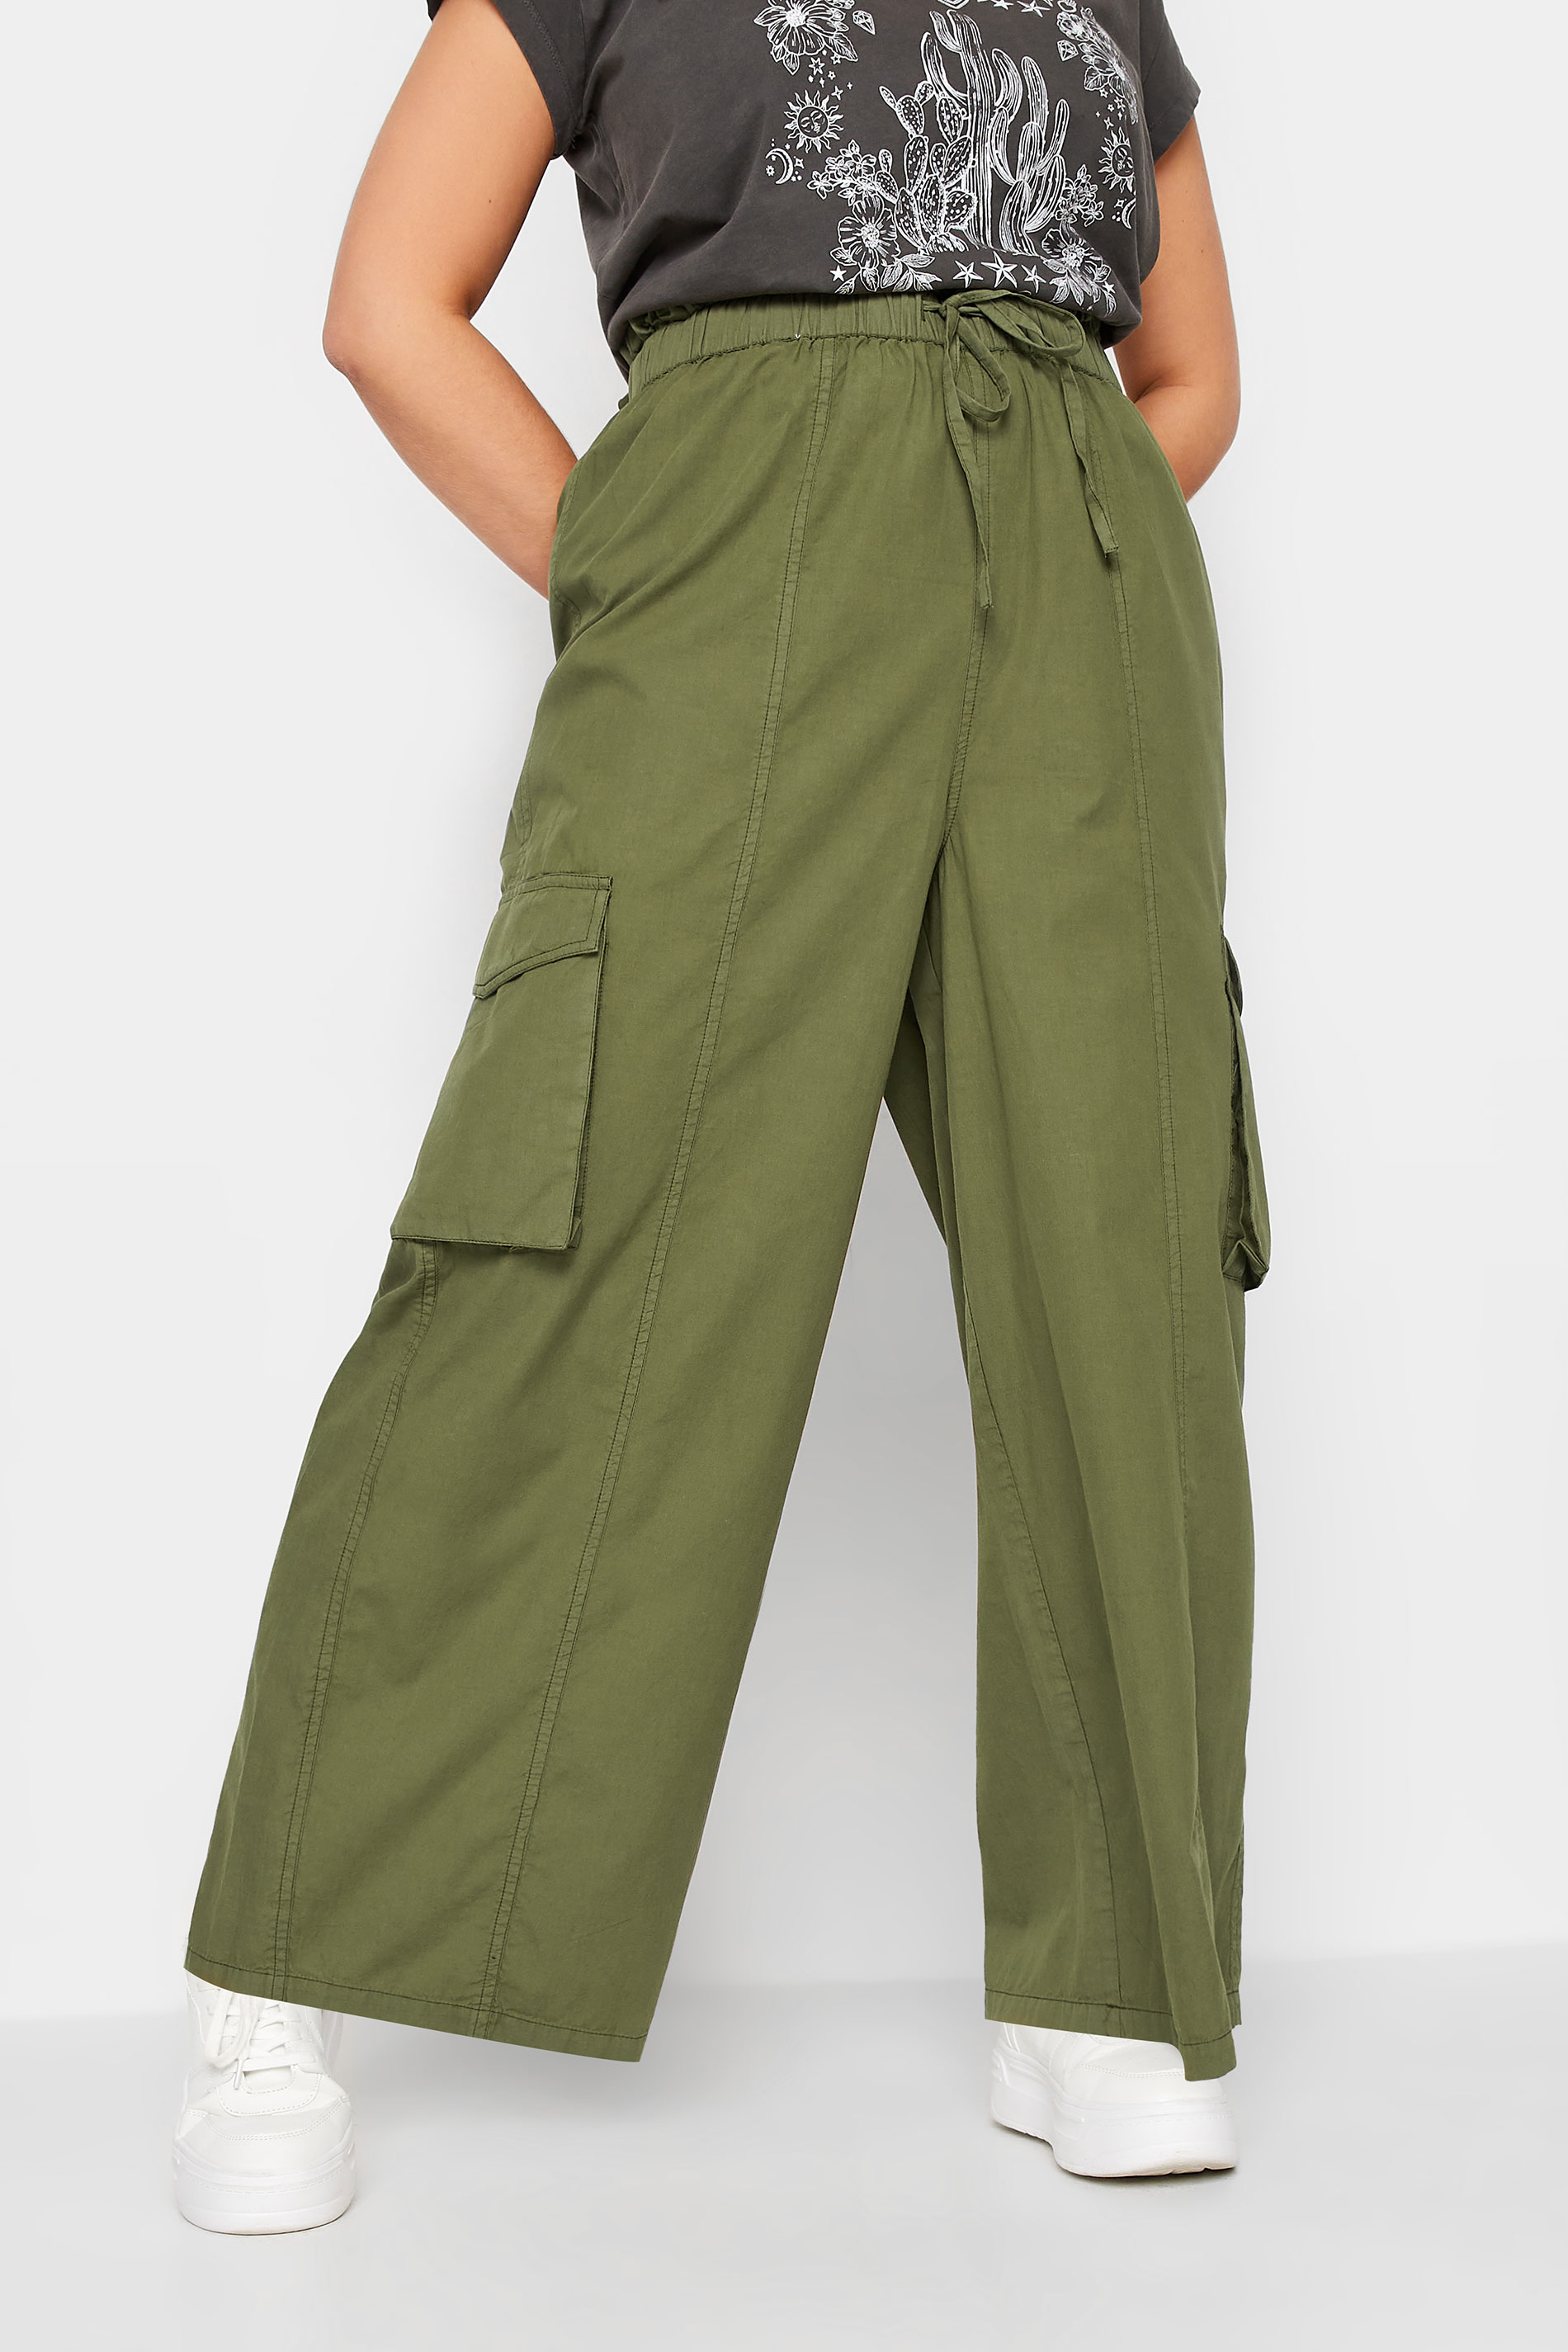 LIMITED COLLECTION Plus Size Khaki Green Cargo Wide Leg Trousers | Yours Clothing 2